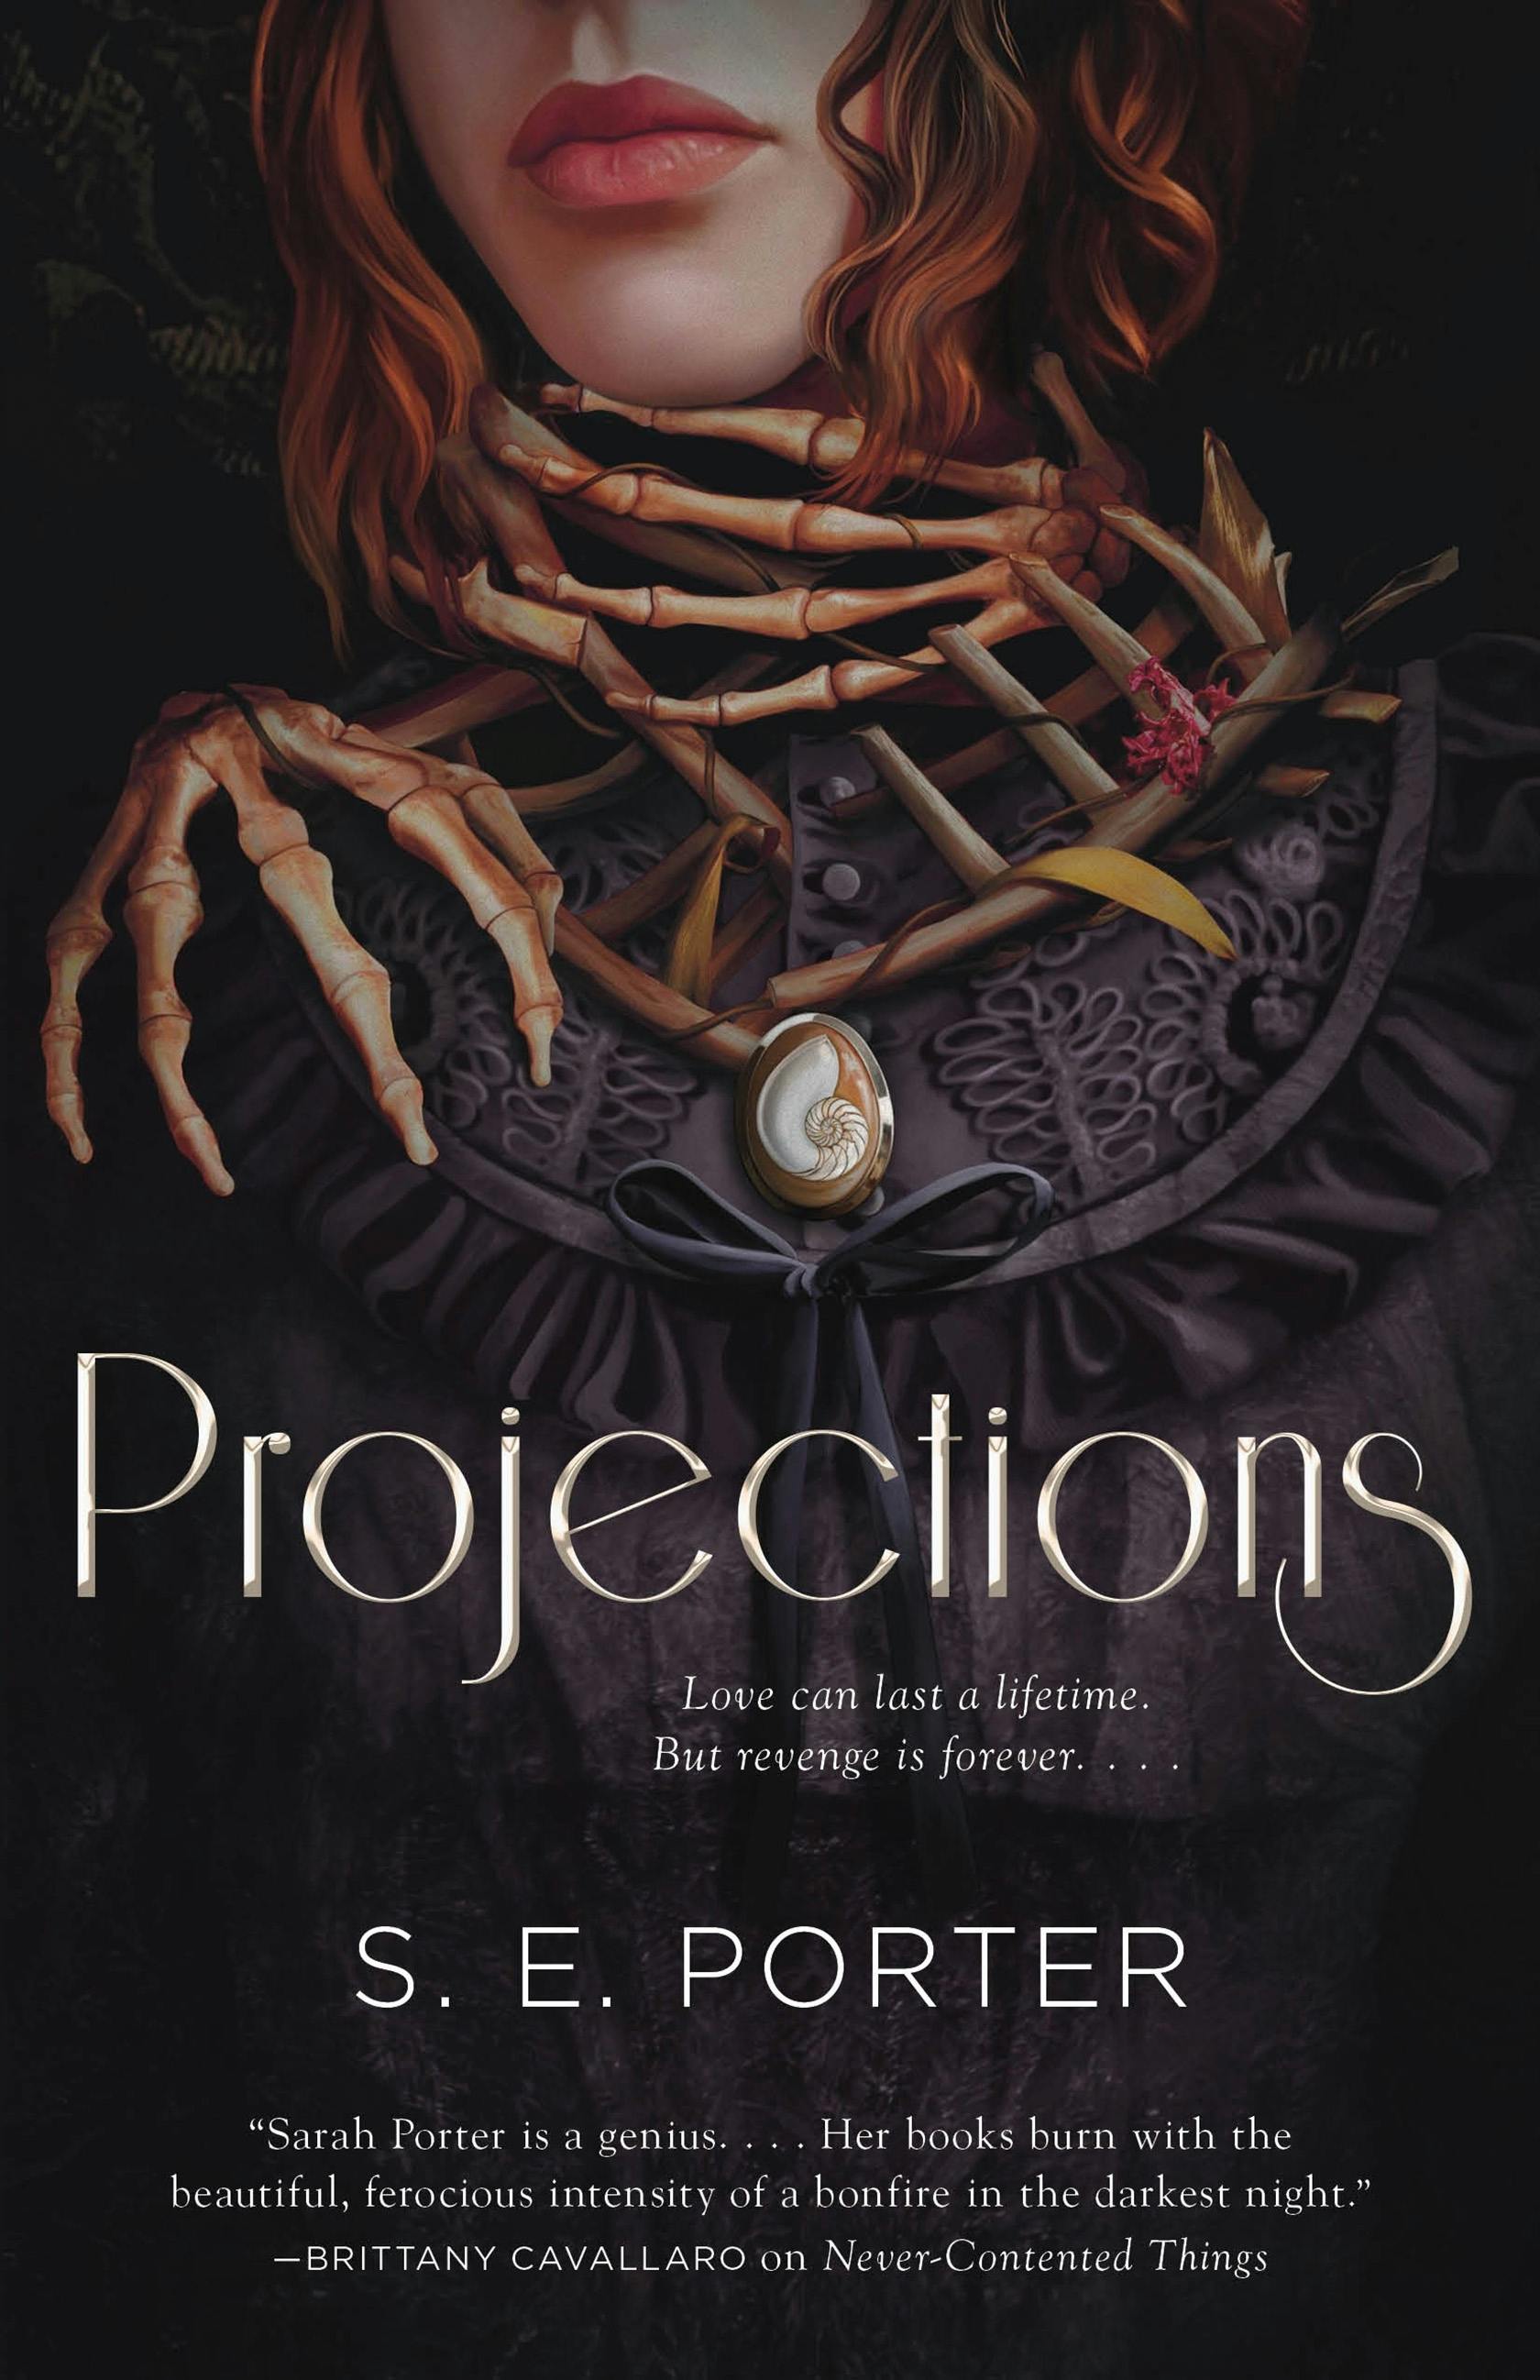 Cover for the book titled as: Projections